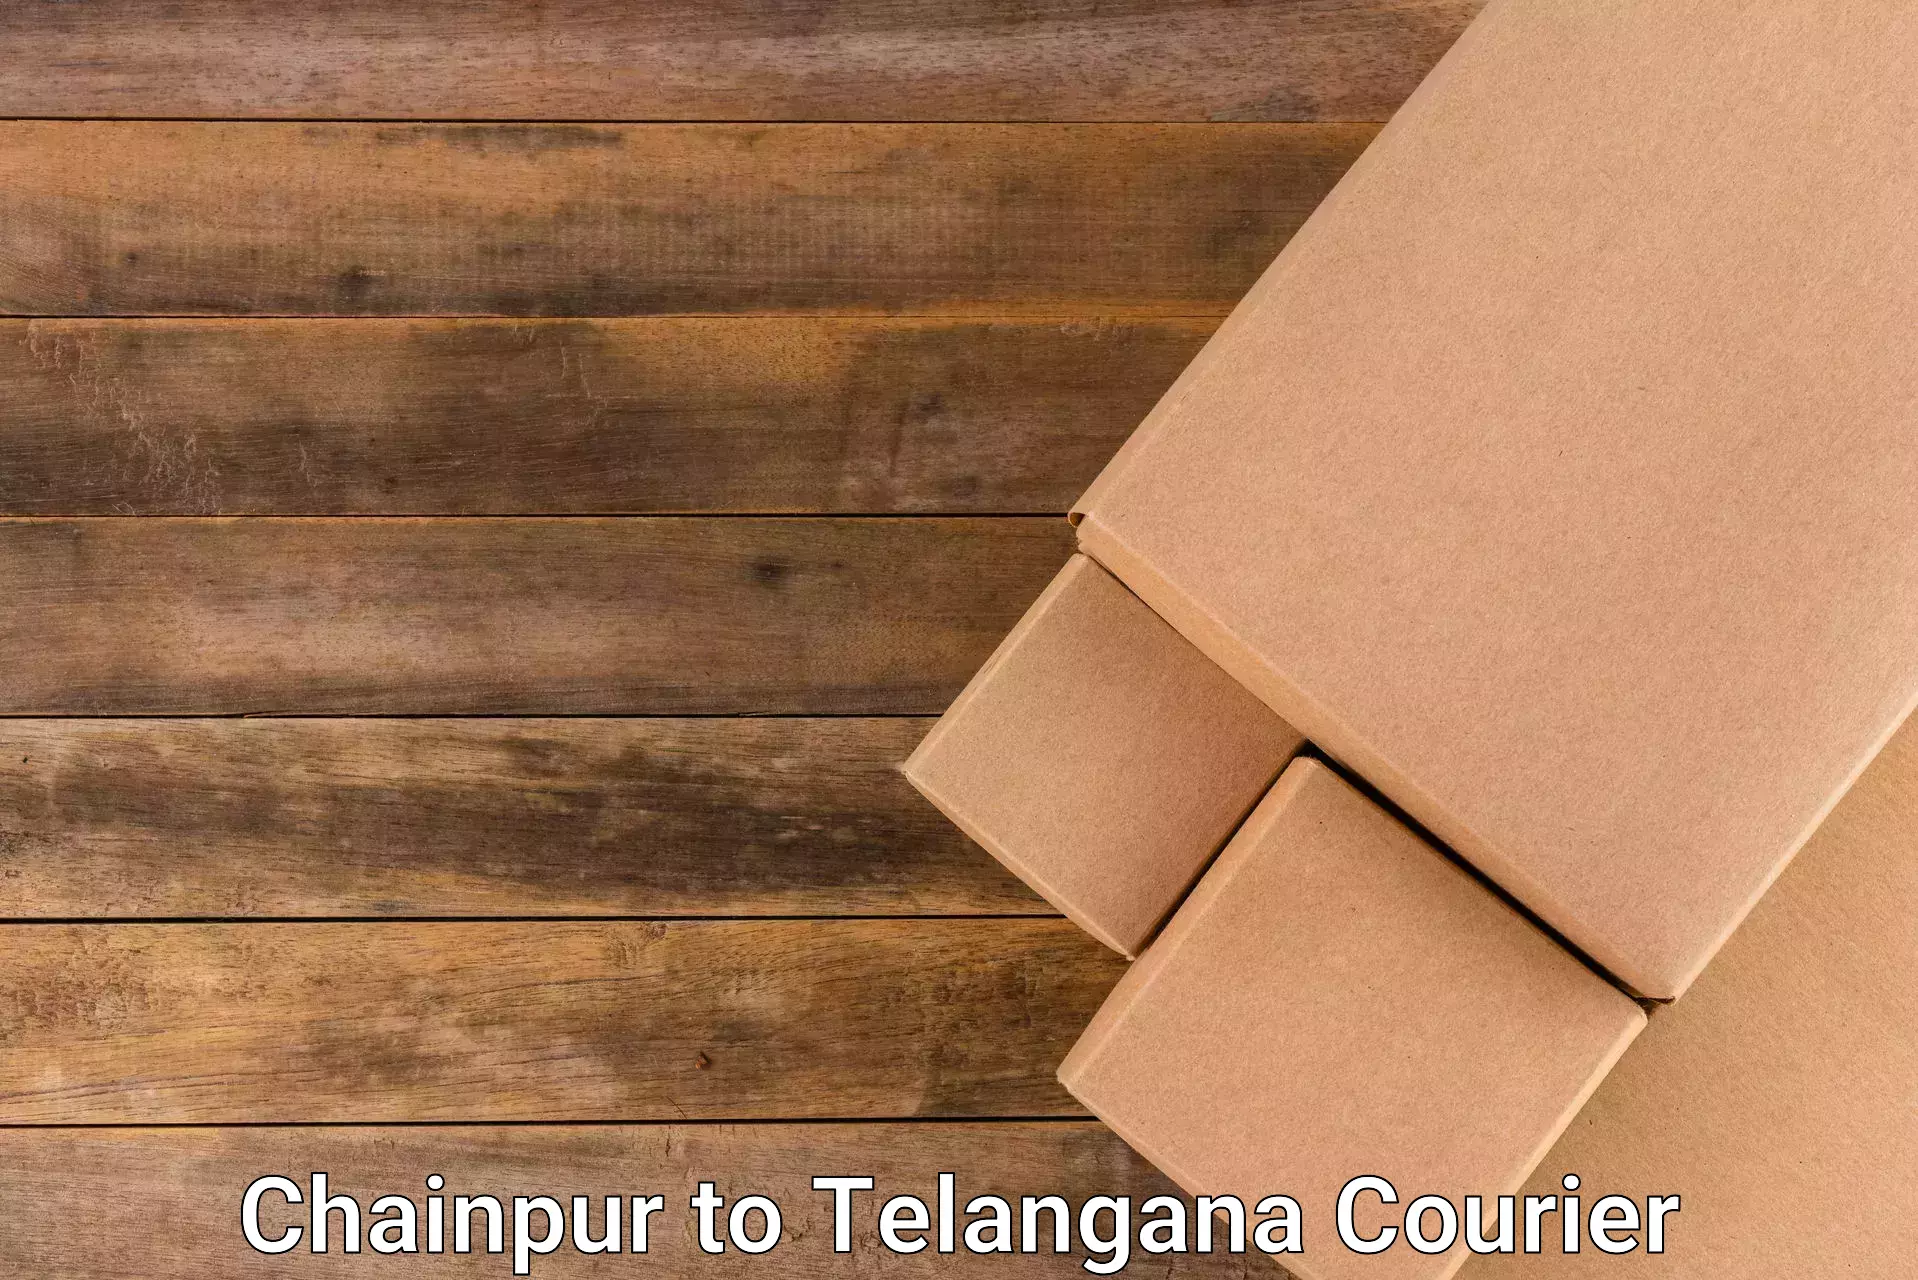 Multi-service courier options Chainpur to Patancheru